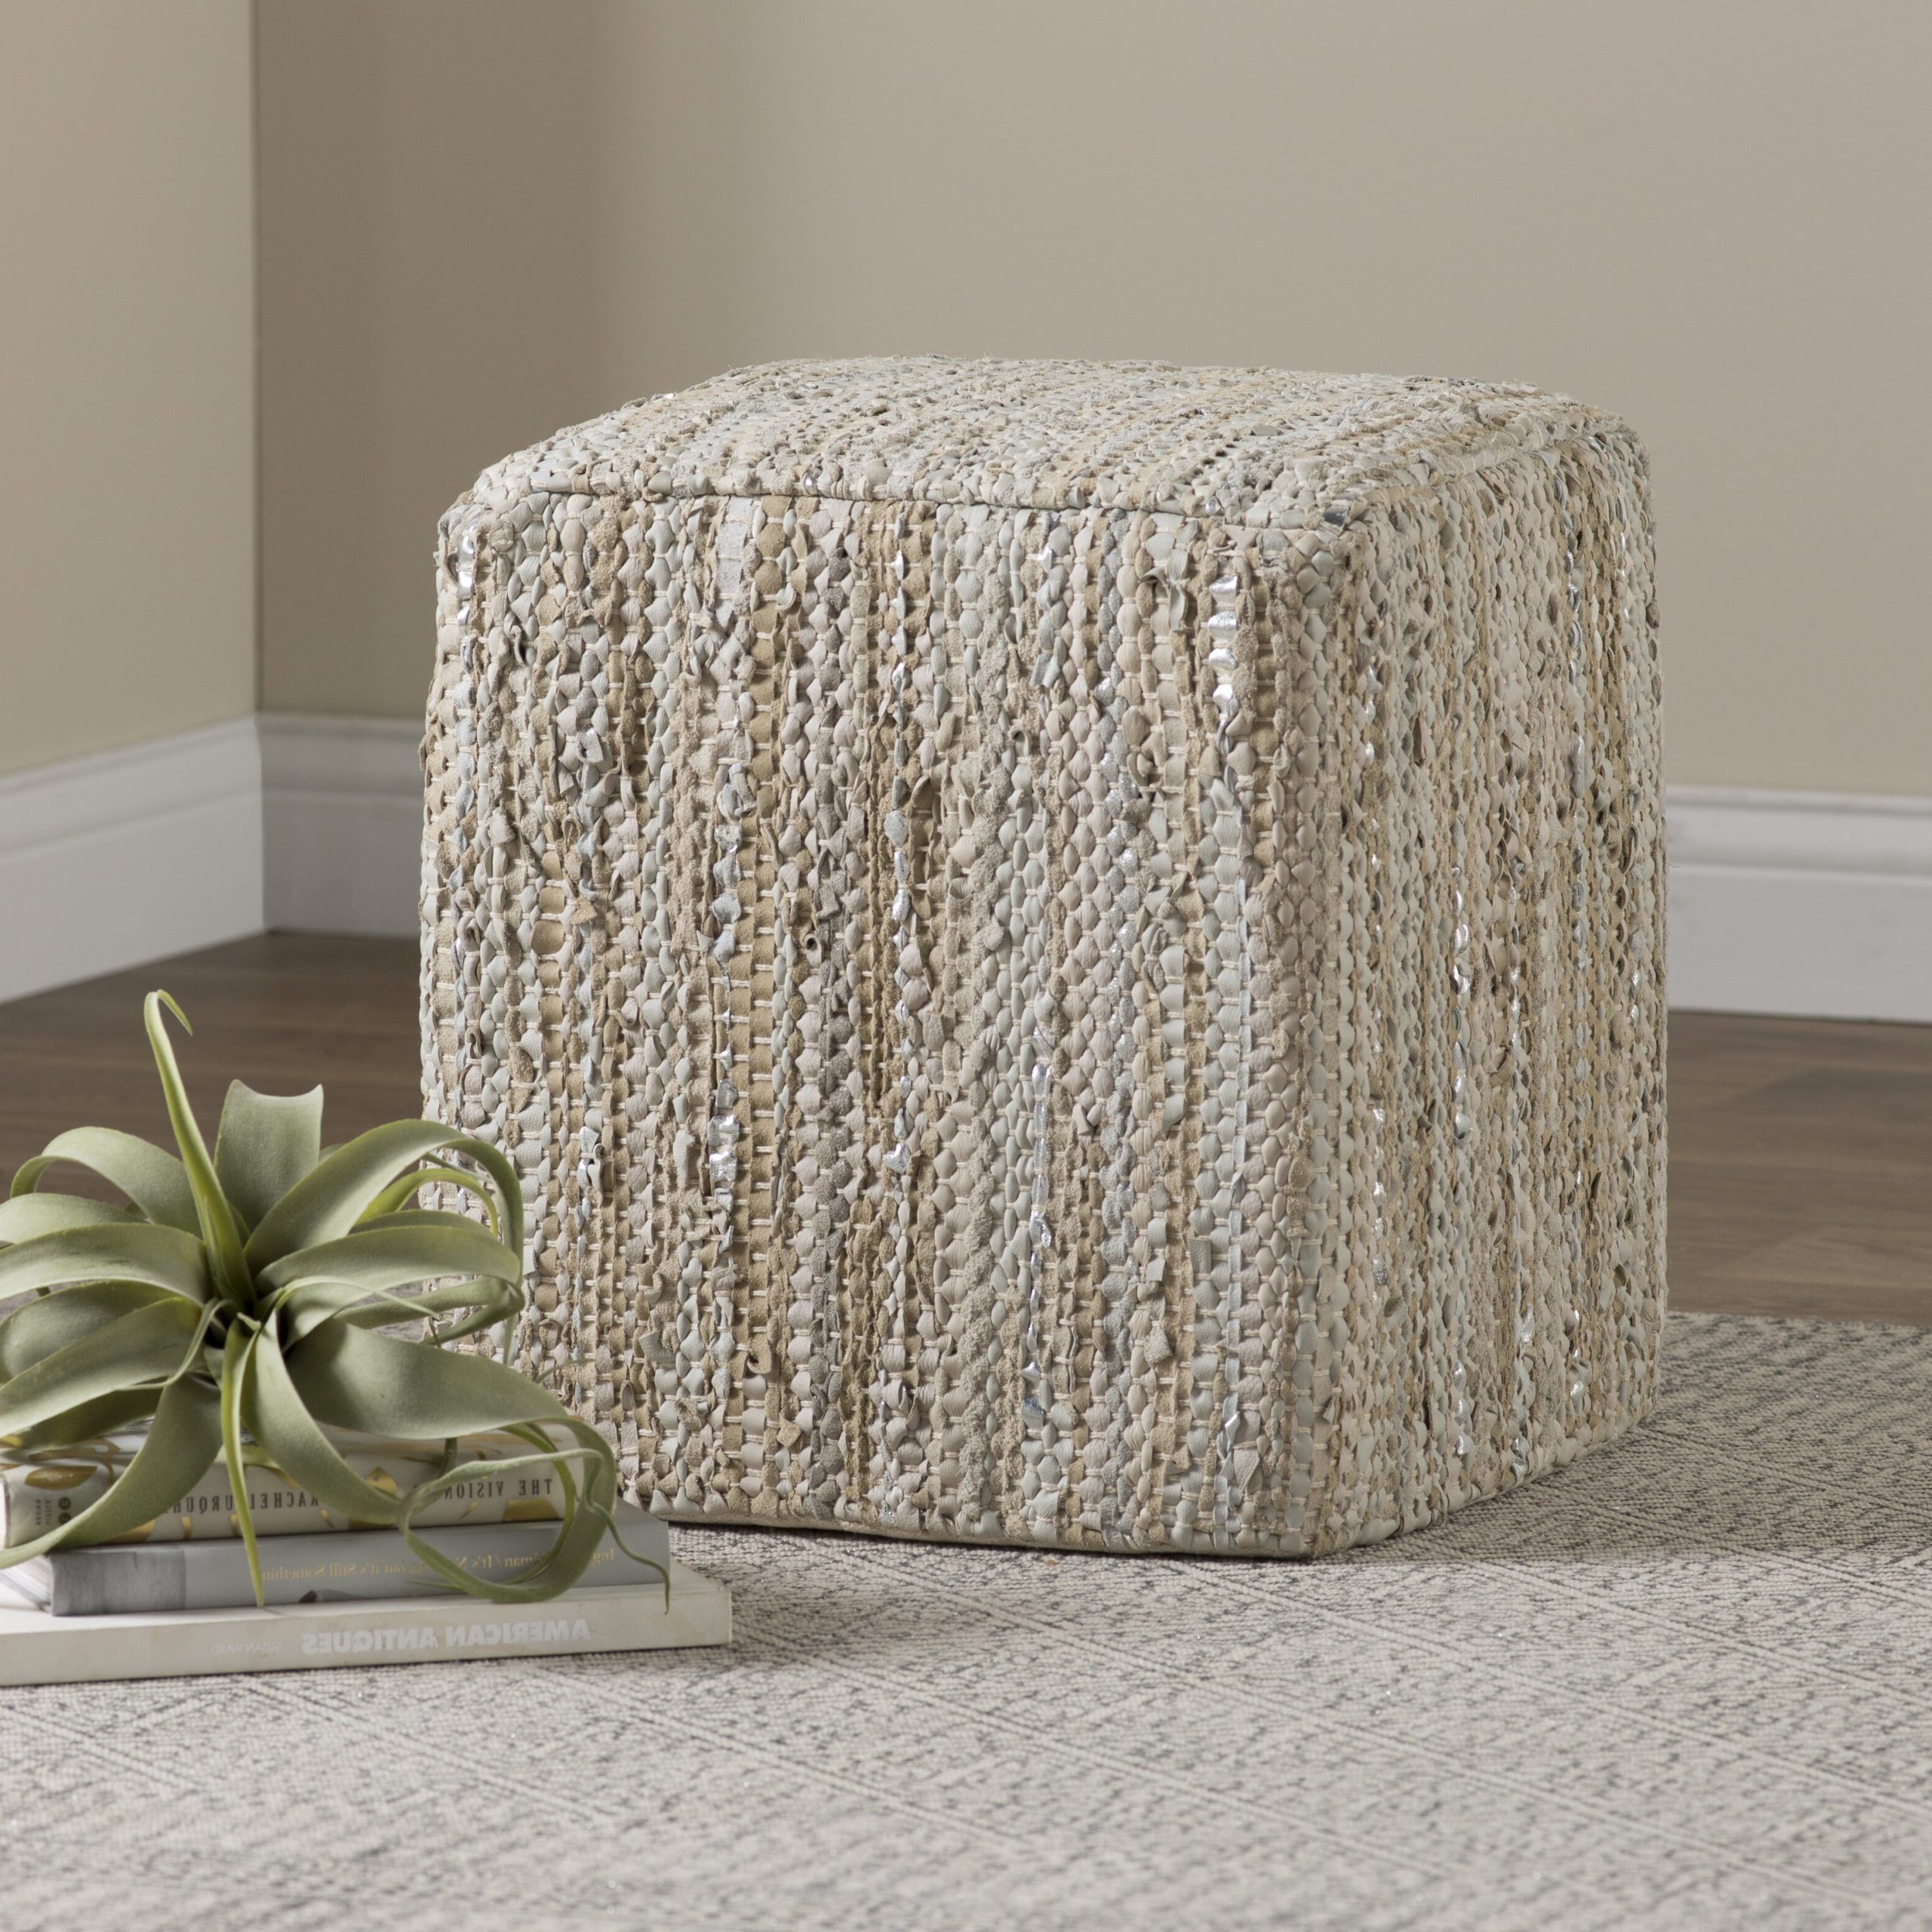 Most Recent Square Pouf Ottomans Pertaining To Mistana™ Dace Vegan Leather Pouf & Reviews (View 10 of 10)